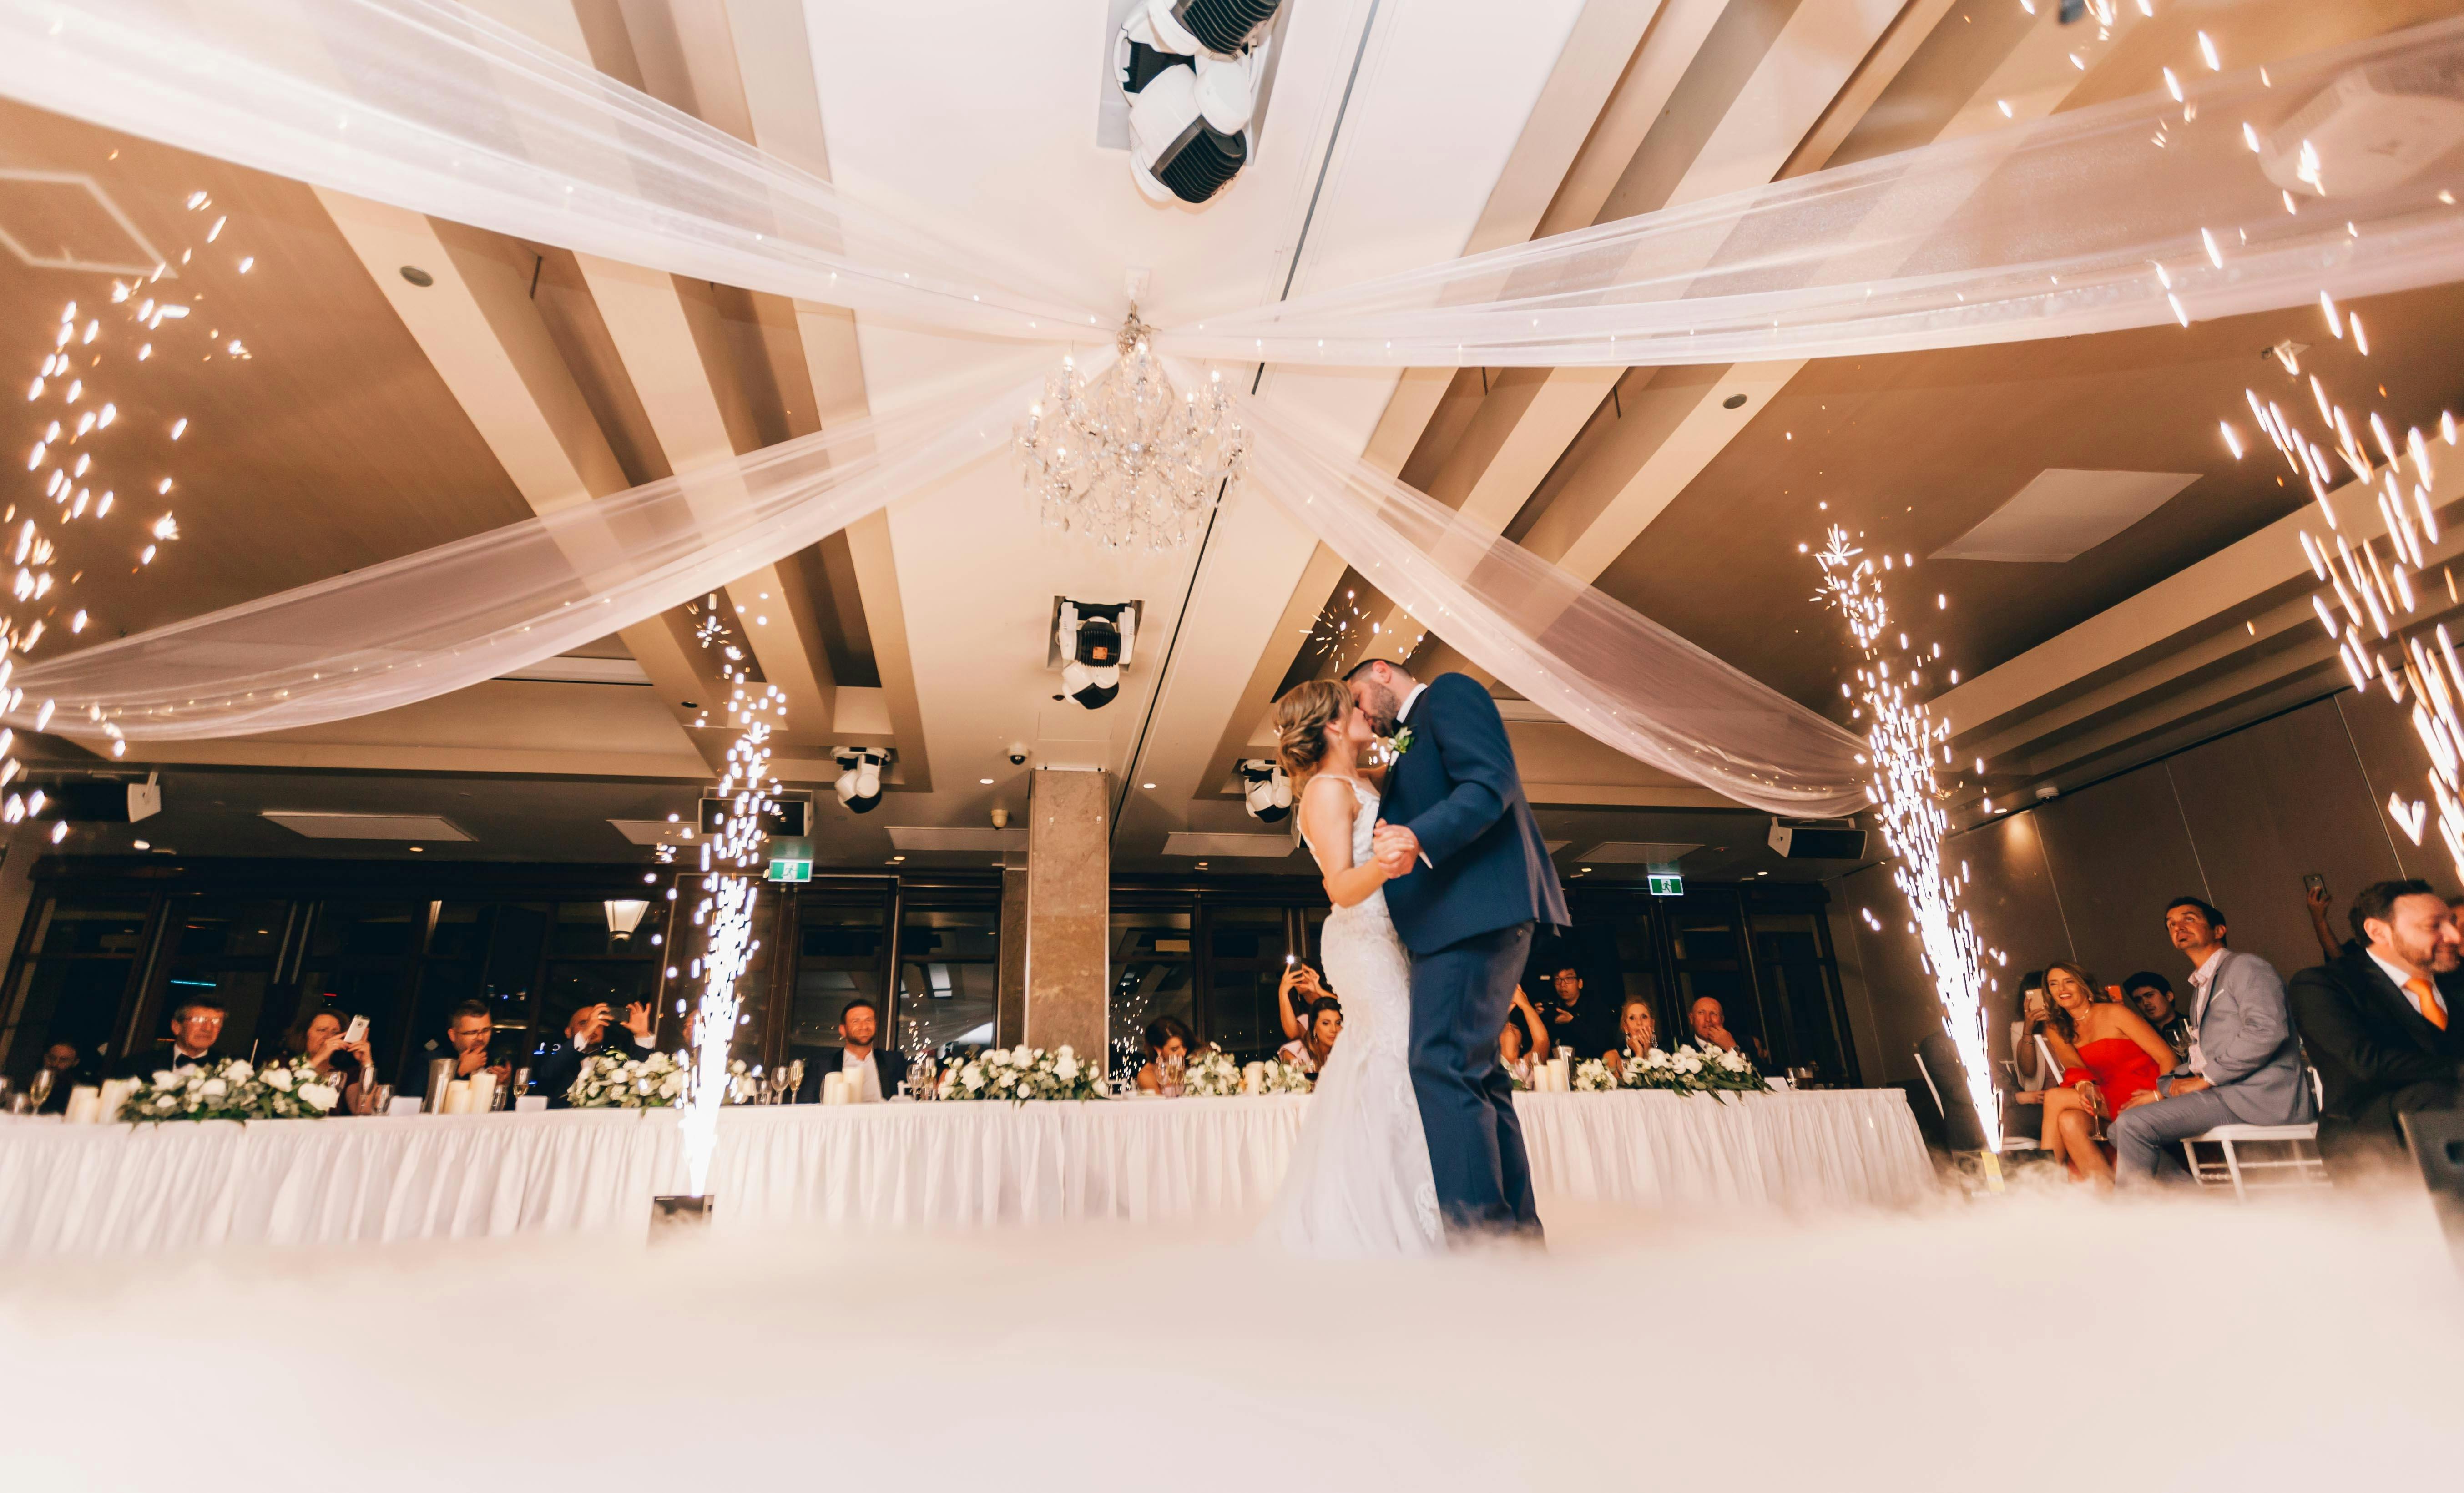 For illustration purposes only. Newlyweds dancing their first dance as a married couple | Source: Pexels